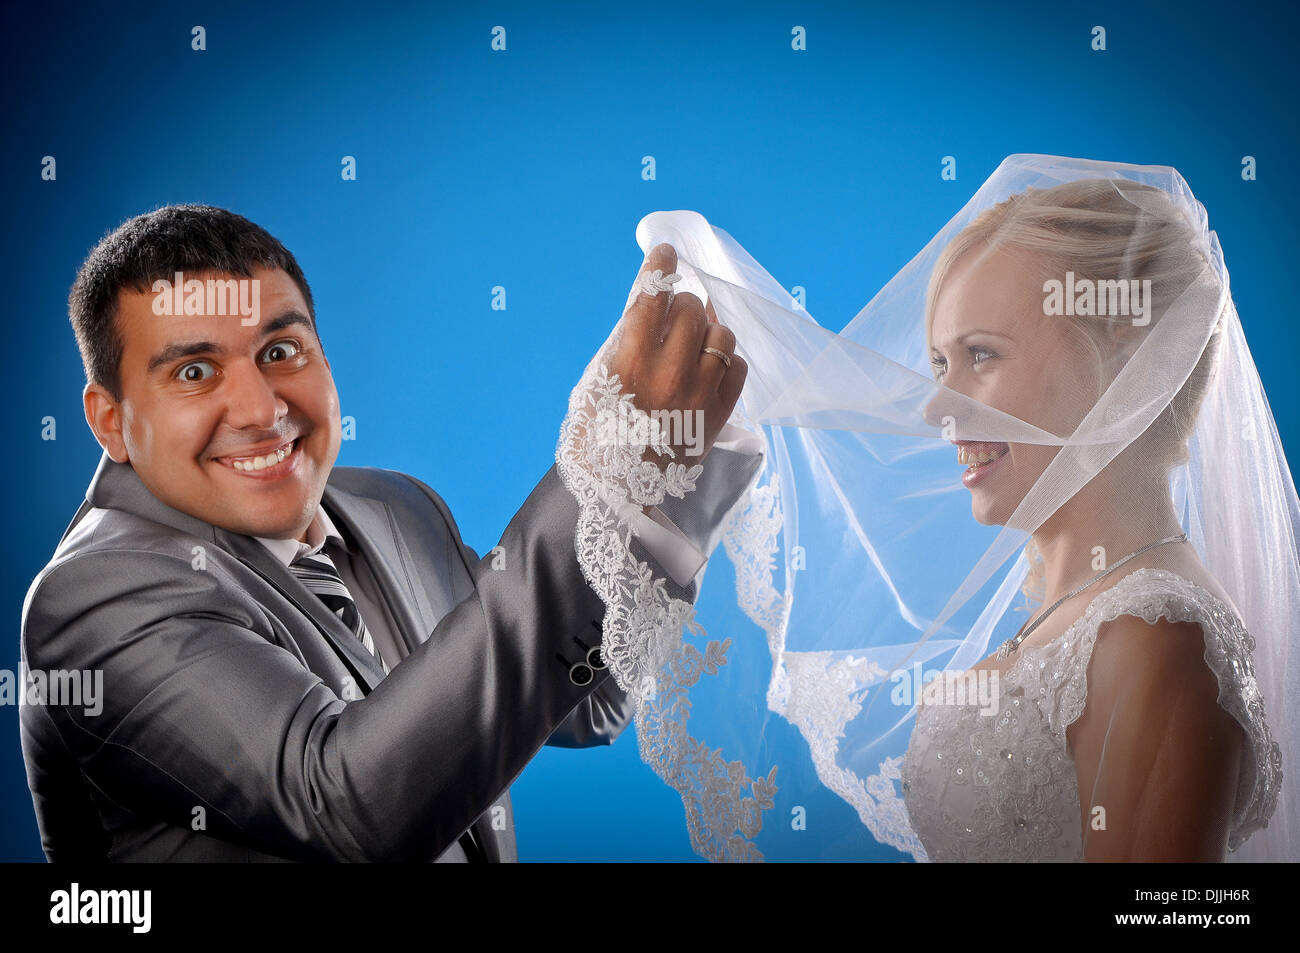 Loving newlyweds standing on a blue background Stock Photo